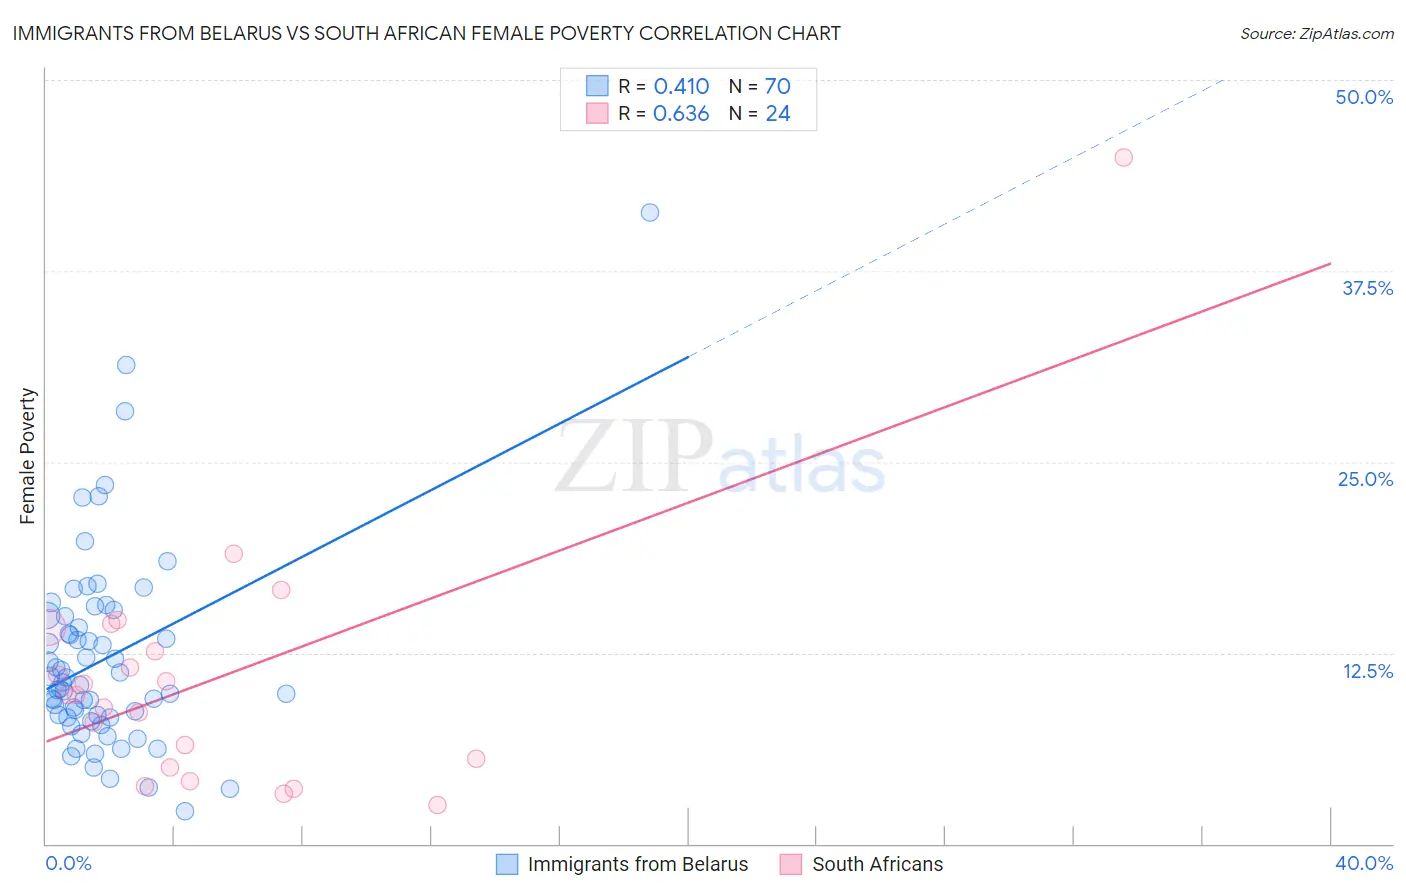 Immigrants from Belarus vs South African Female Poverty